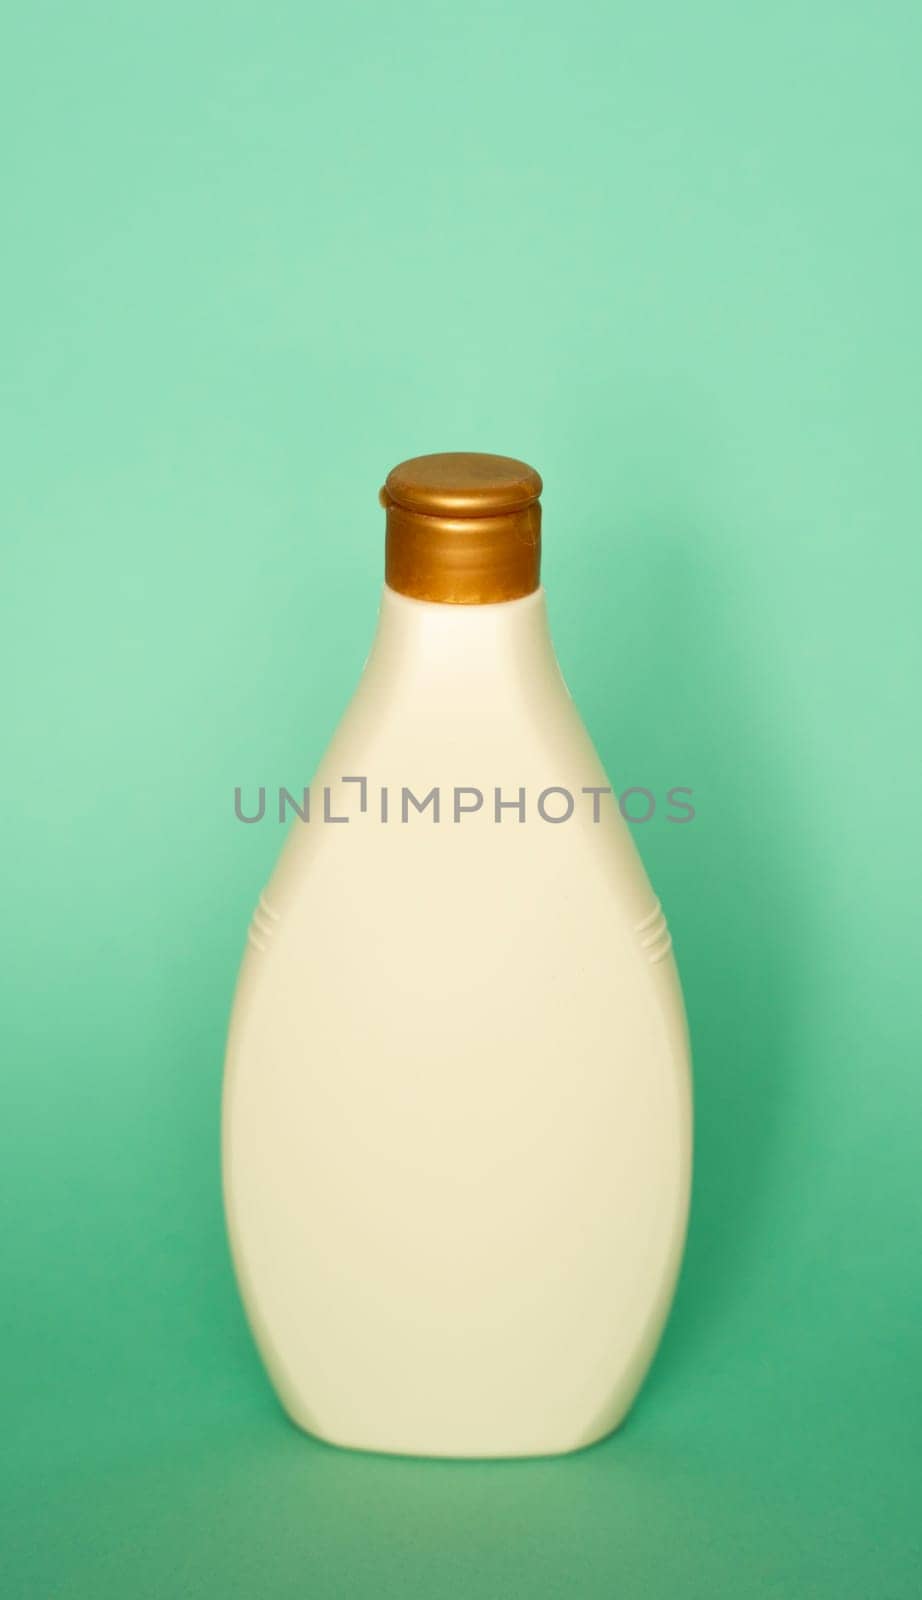 Beige container cosmetic plastic bottle for gel, lotion, cream, shampoo, bath foam on green background. Cosmetic packaging mockup with copy space